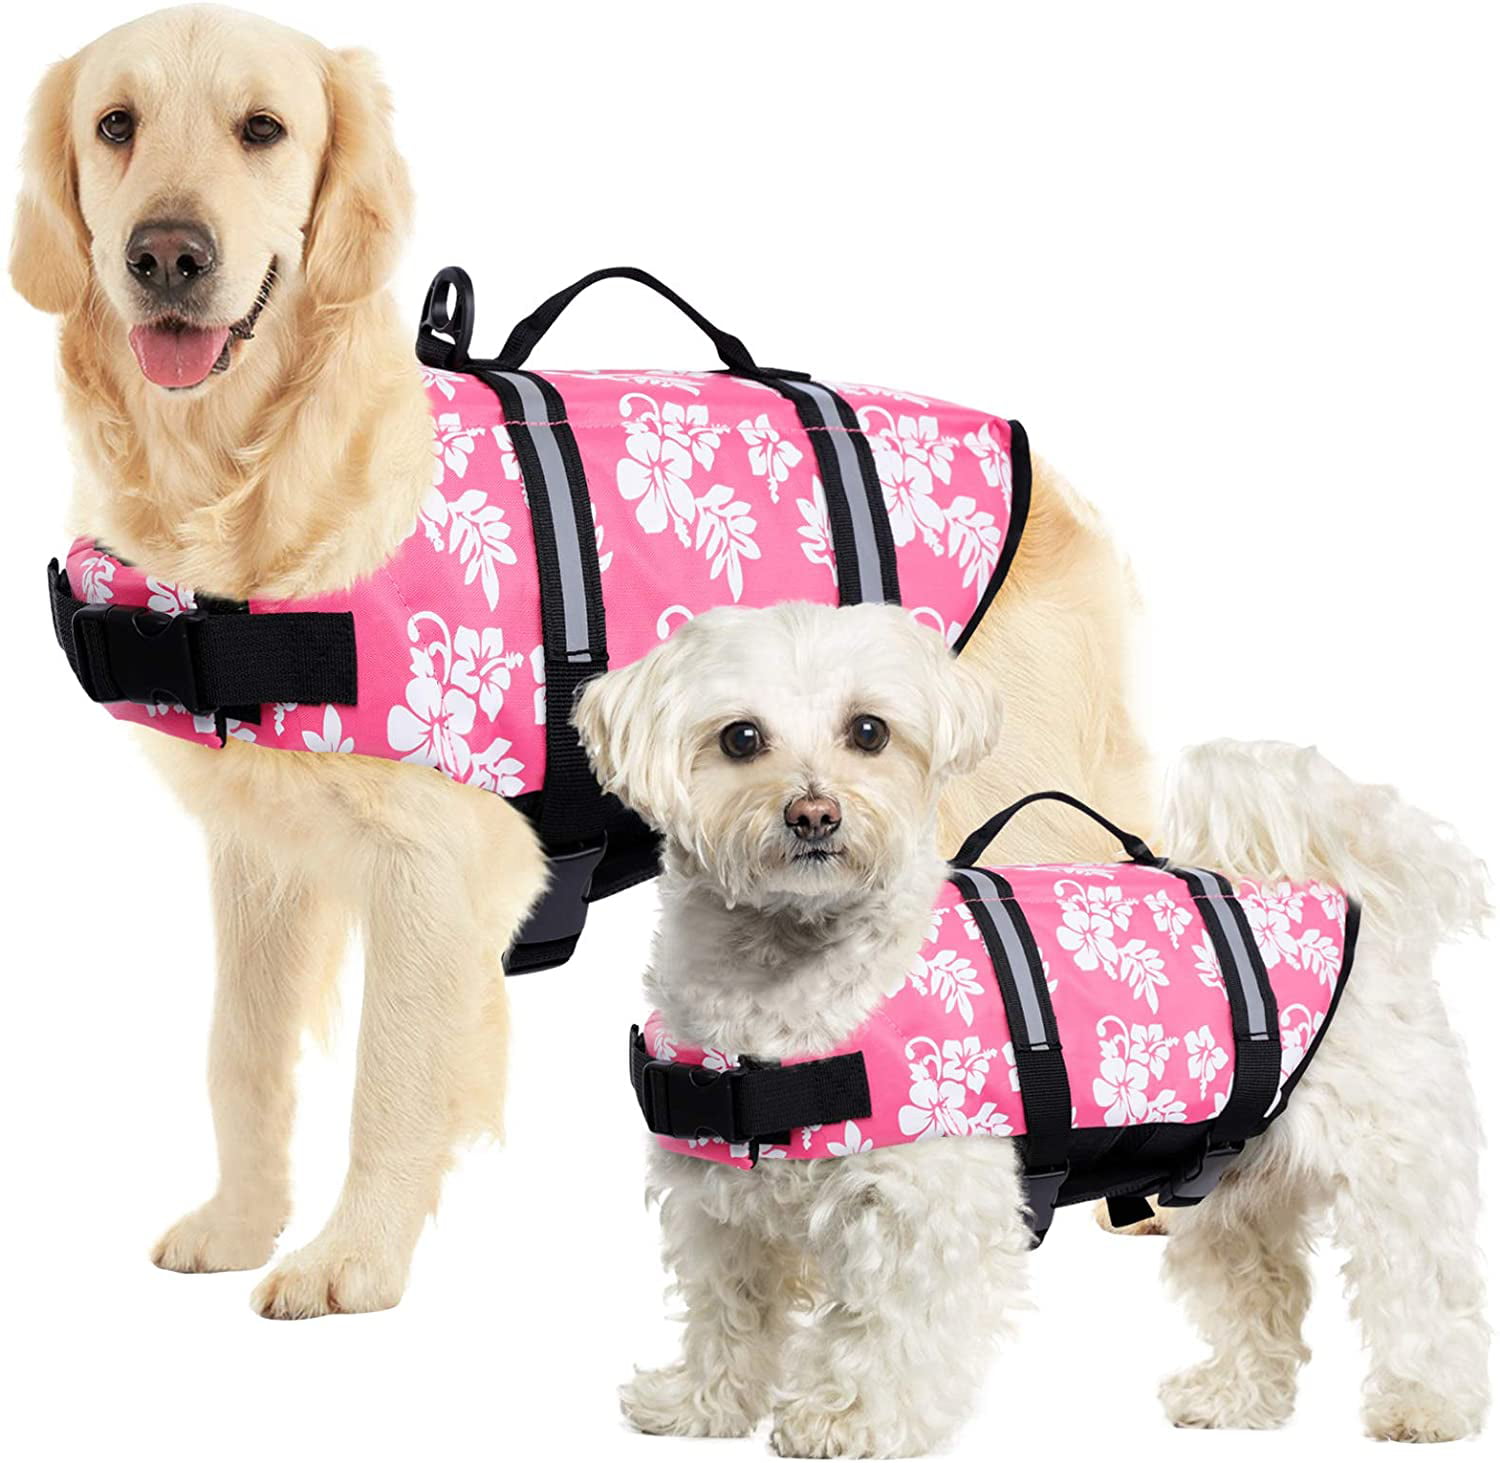 Safety Pet Flotation Life Vest with Reflective Stripes and Rescue Handle Blue, L Adjustable Puppy Lifesaver Swimsuit Preserver for Small Medium Large Dogs SUNFURA Ripstop Dog Life Jacket 